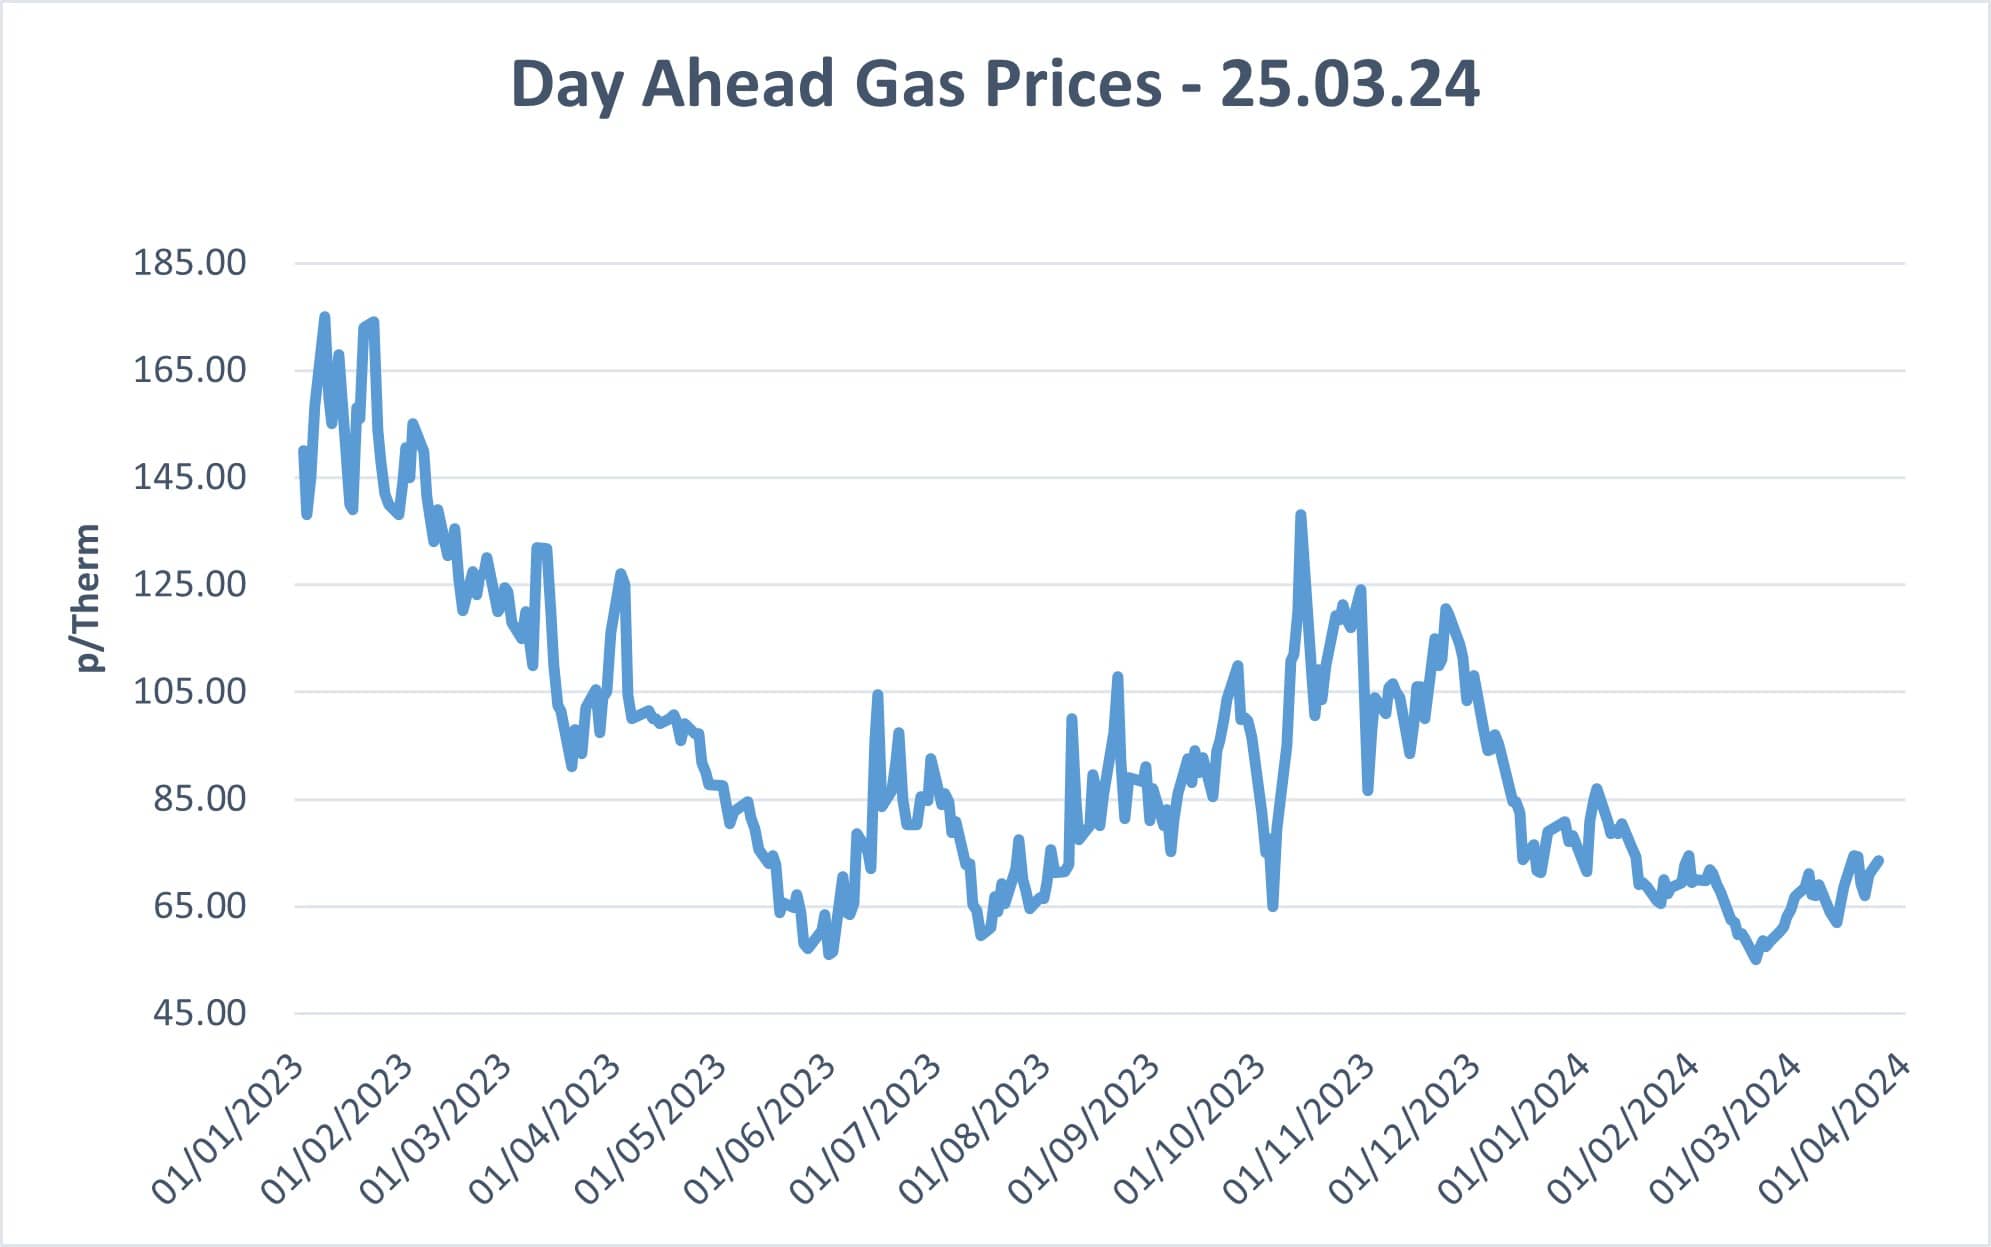 wholesale gas prices day ahead 25.03.24